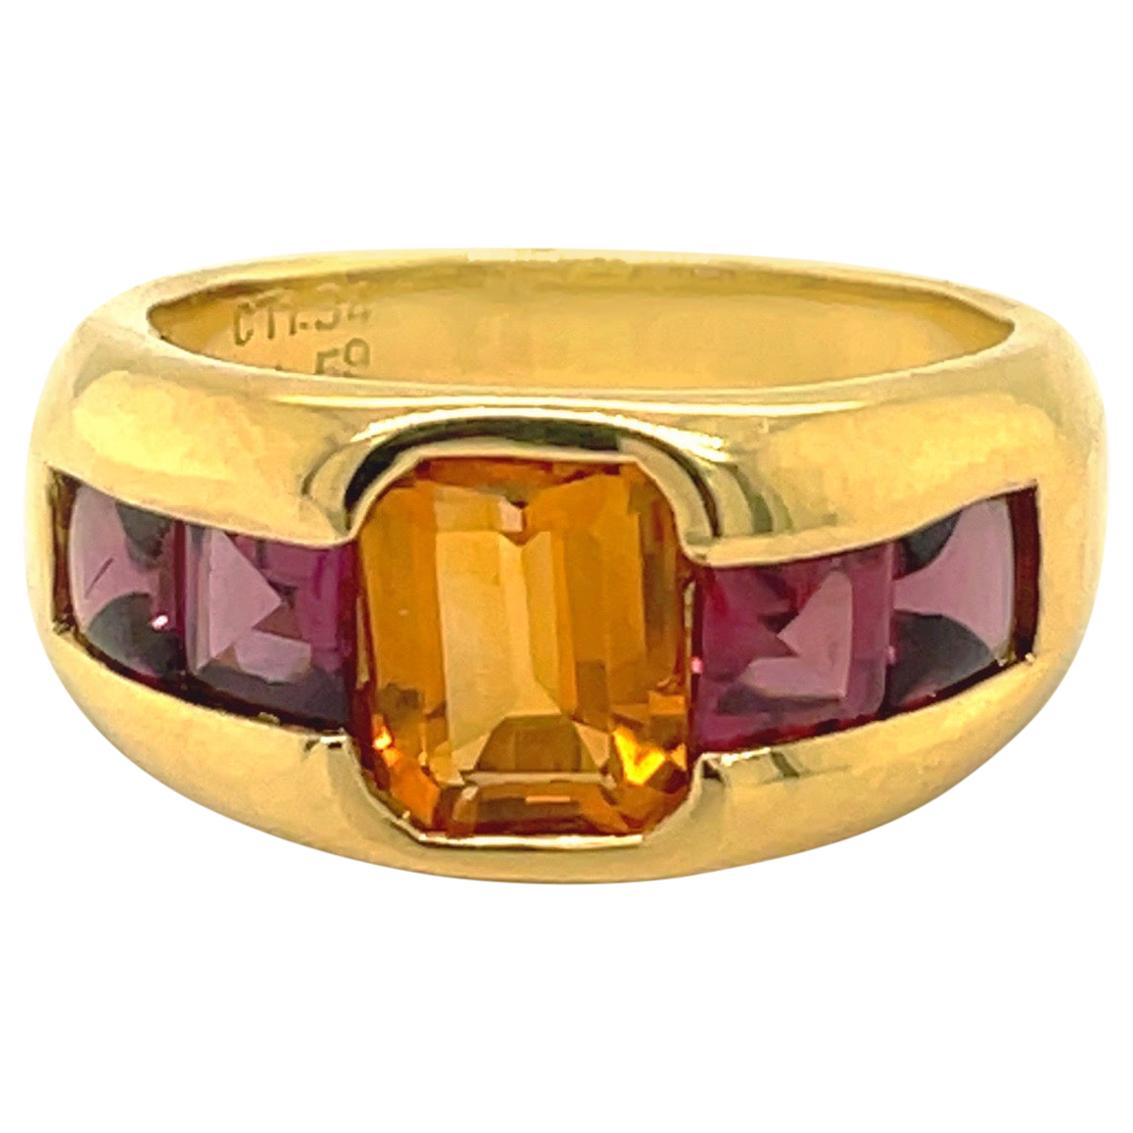 Gregg Ruth 18KT Yellow Gold Ring with 1.34Ct. Citrine Center & 1.59Ct. Rhodolite